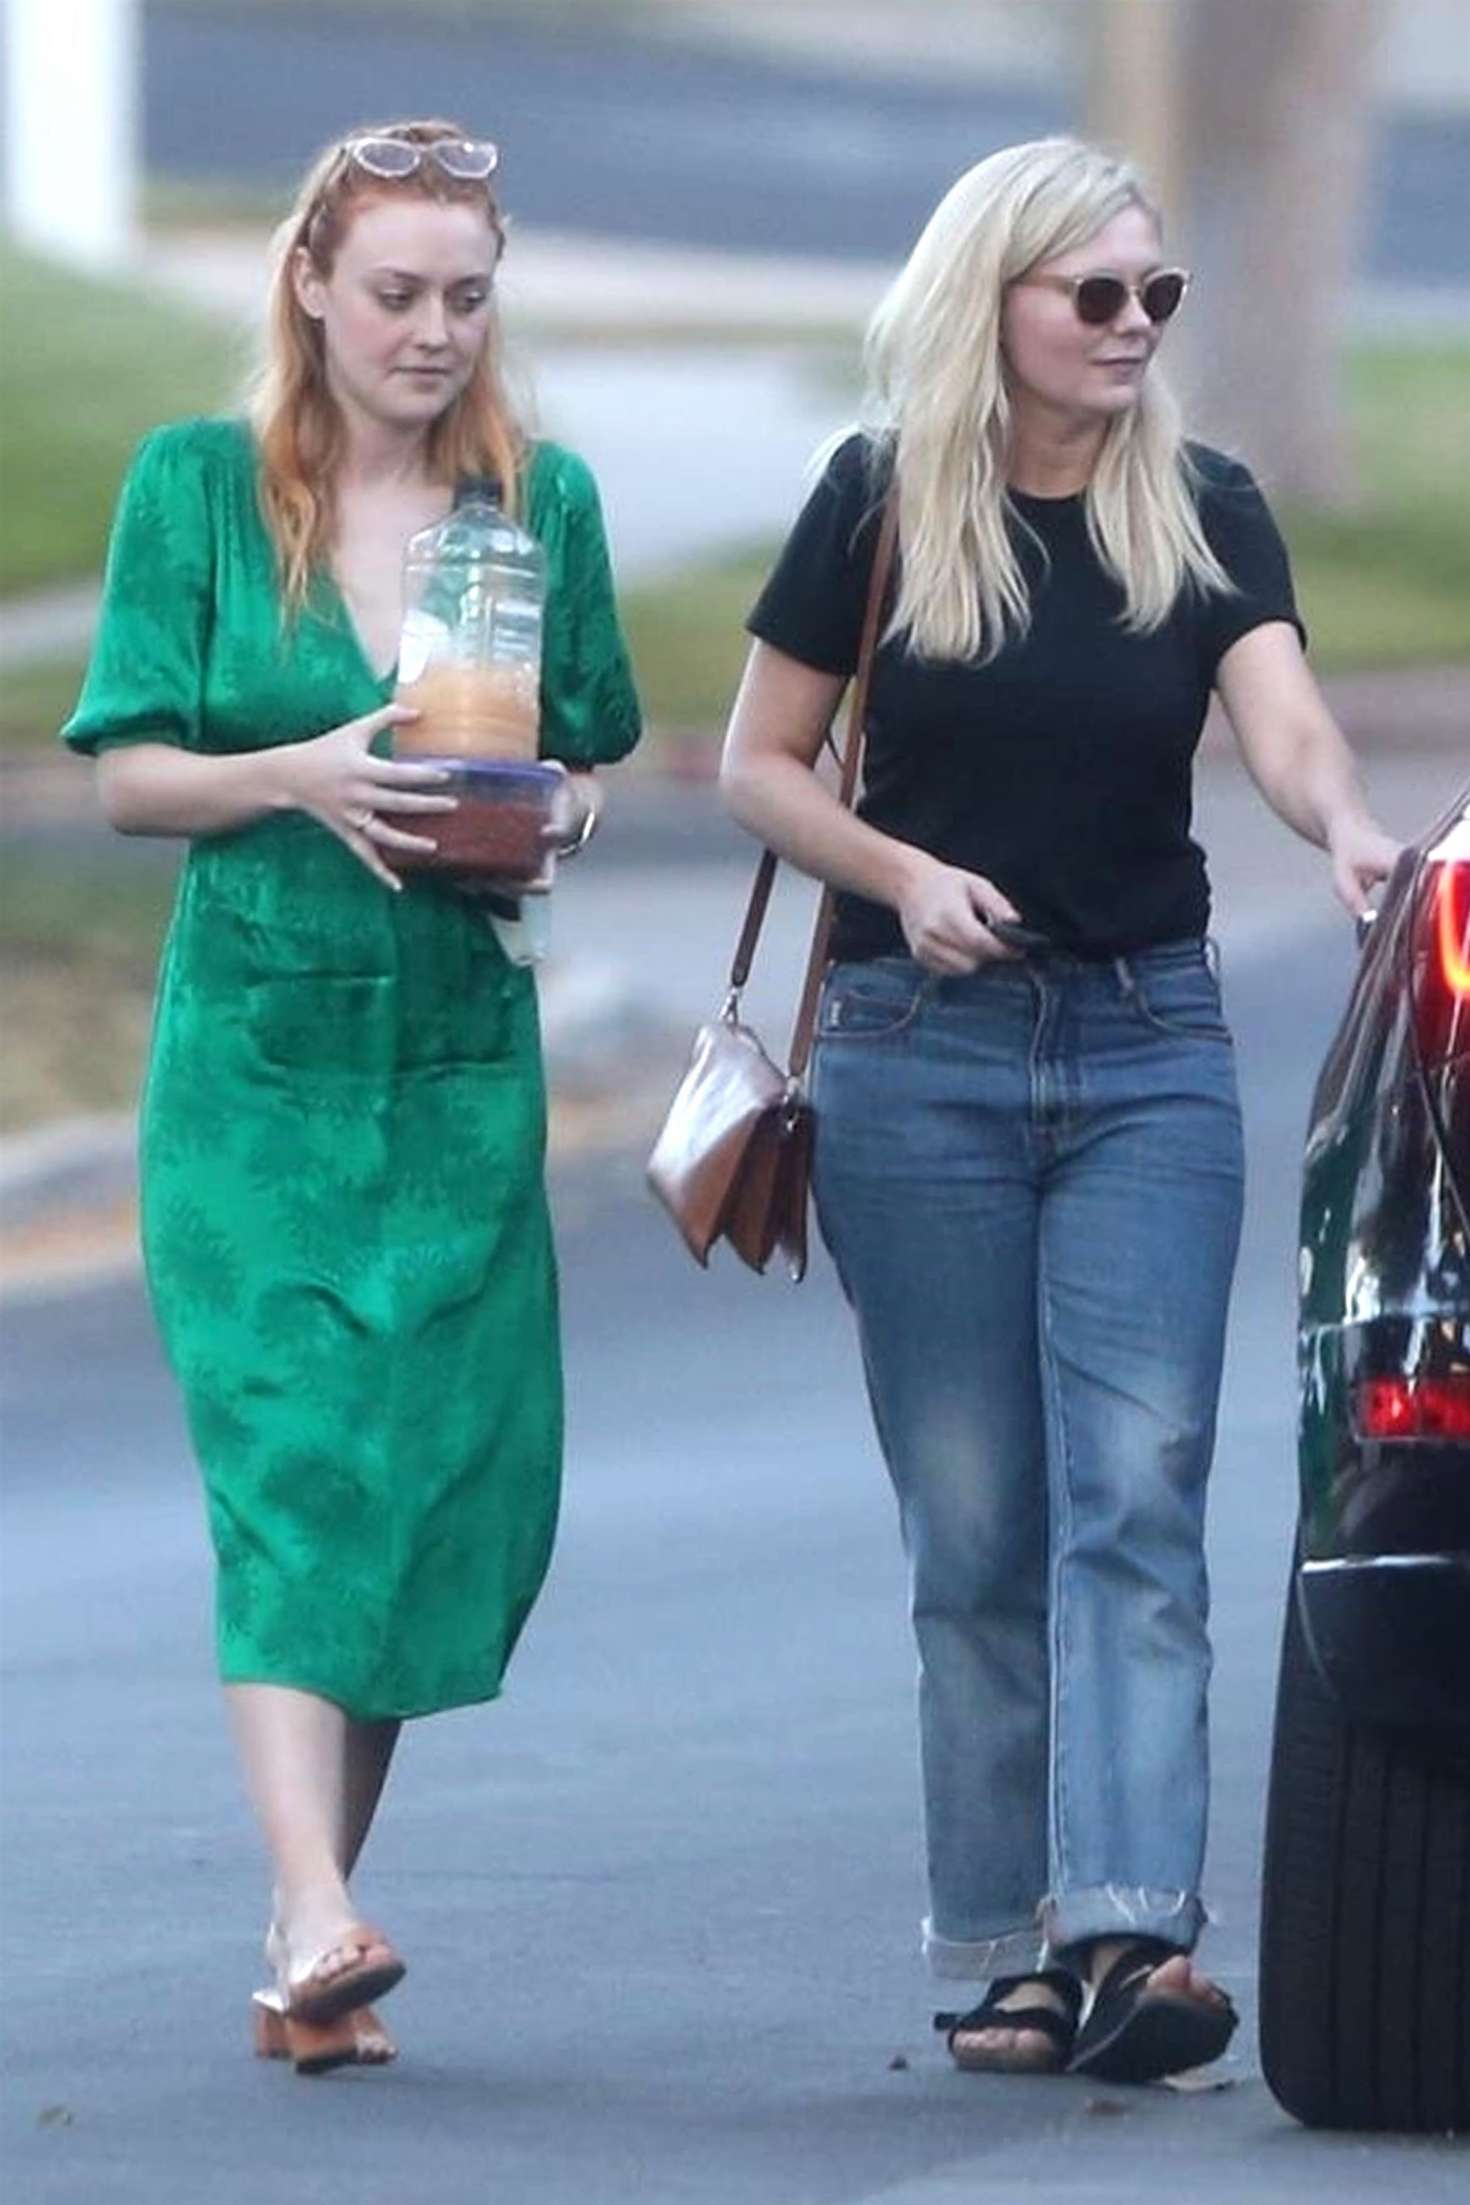 Dakota Fanning and Kirsten Dunst â€“ Heading to a party together in Los Angeles